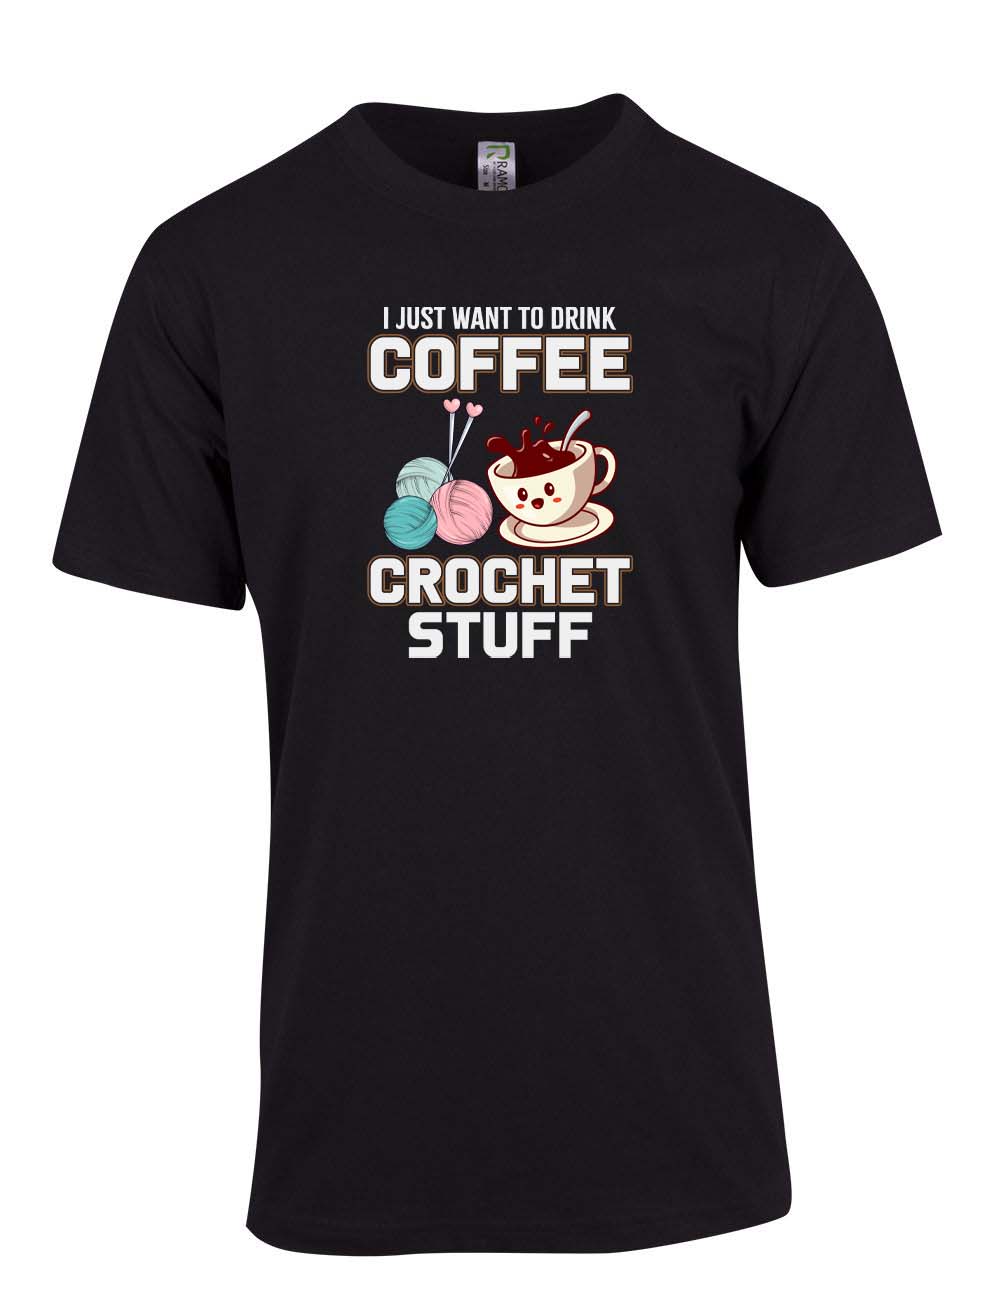 I Just Want to Drink Coffee and Crochet T-shirt